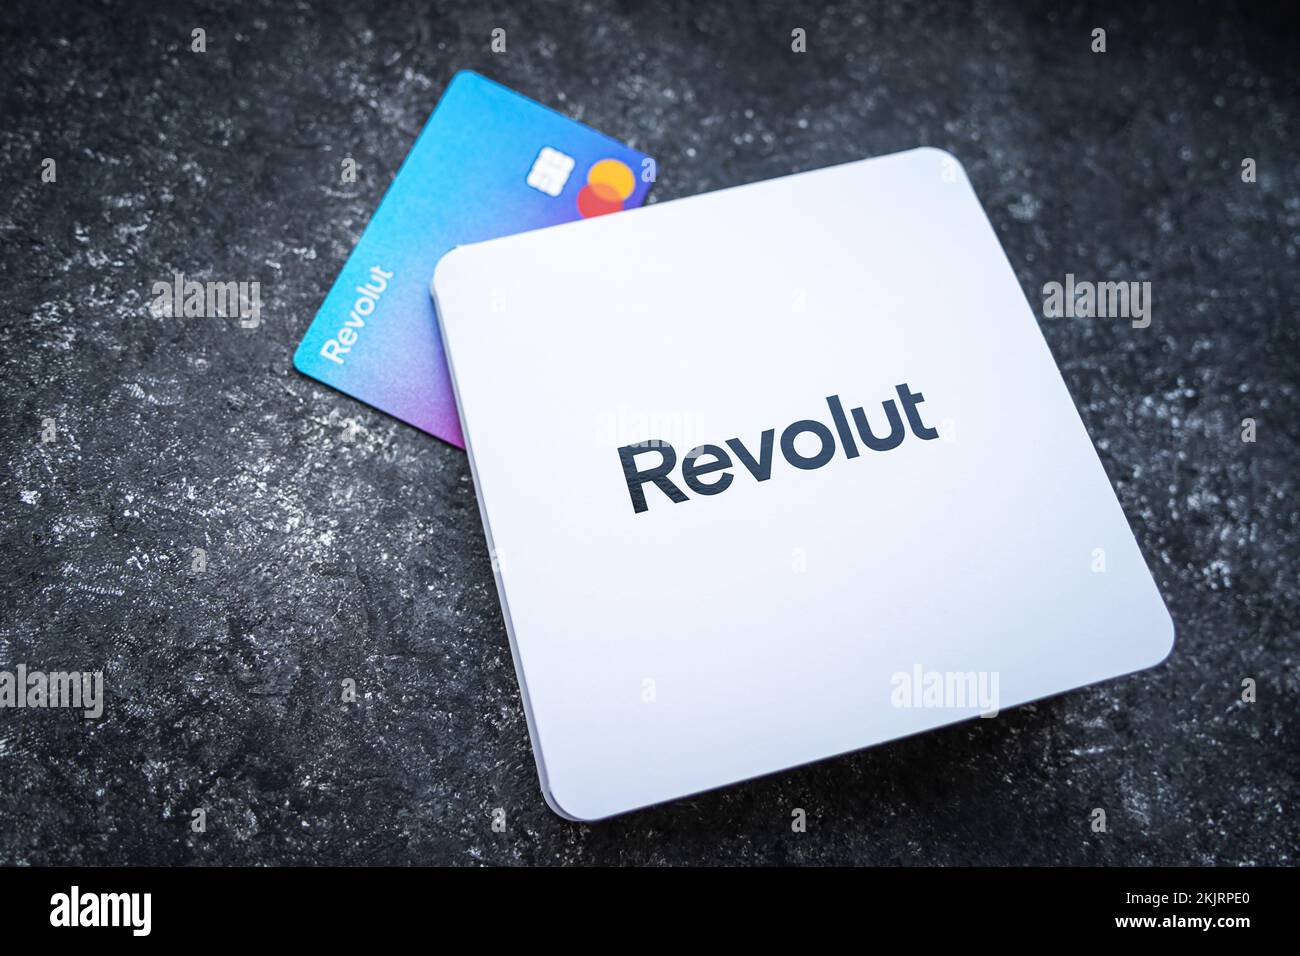 Revolut Bank card with the white envelope. New redesigned Revolut Mastercard without card details on concrete background. Krakow, Poland - November 11, 2022. Stock Photo